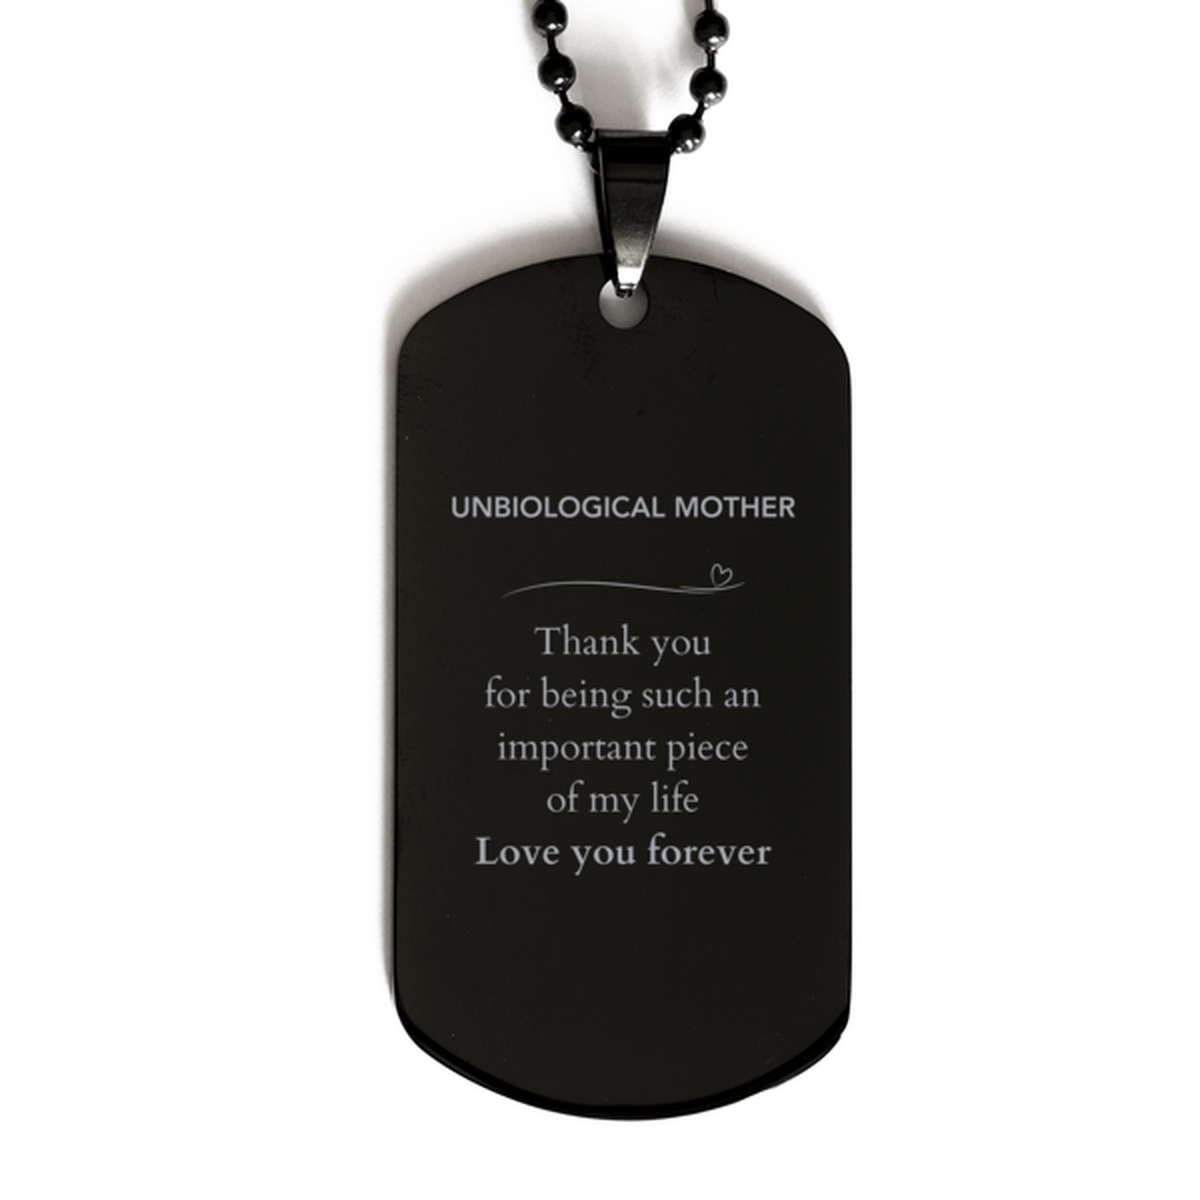 Appropriate Unbiological Mother Black Dog Tag Epic Birthday Gifts for Unbiological Mother Thank you for being such an important piece of my life Unbiological Mother Christmas Mothers Fathers Day